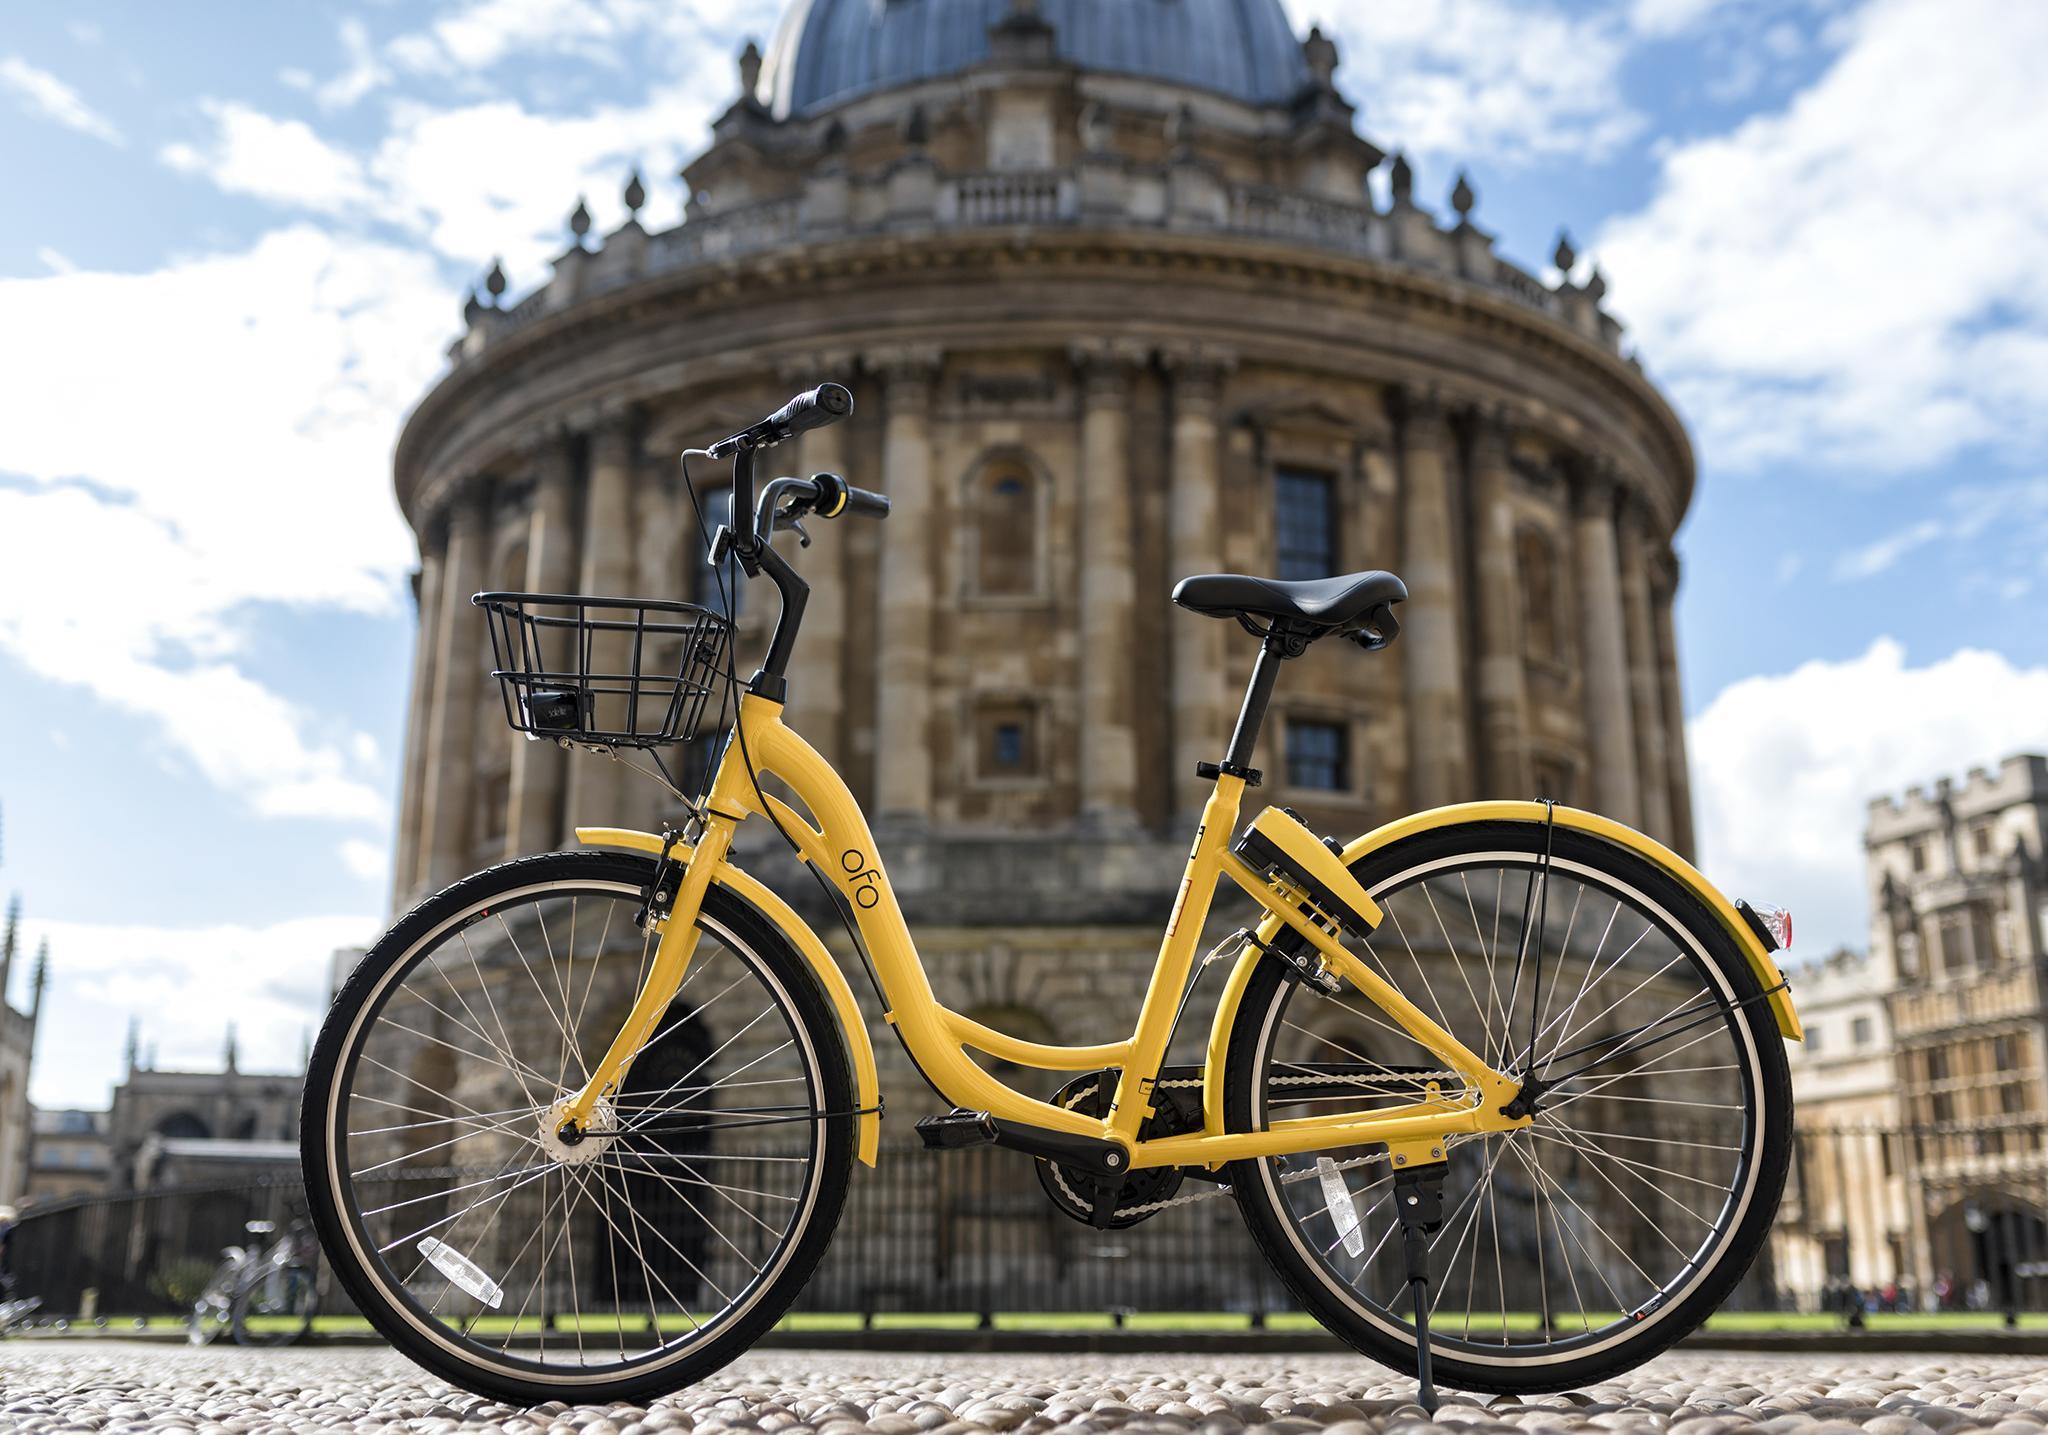 Popular in China, Ofo will launch in Oxford